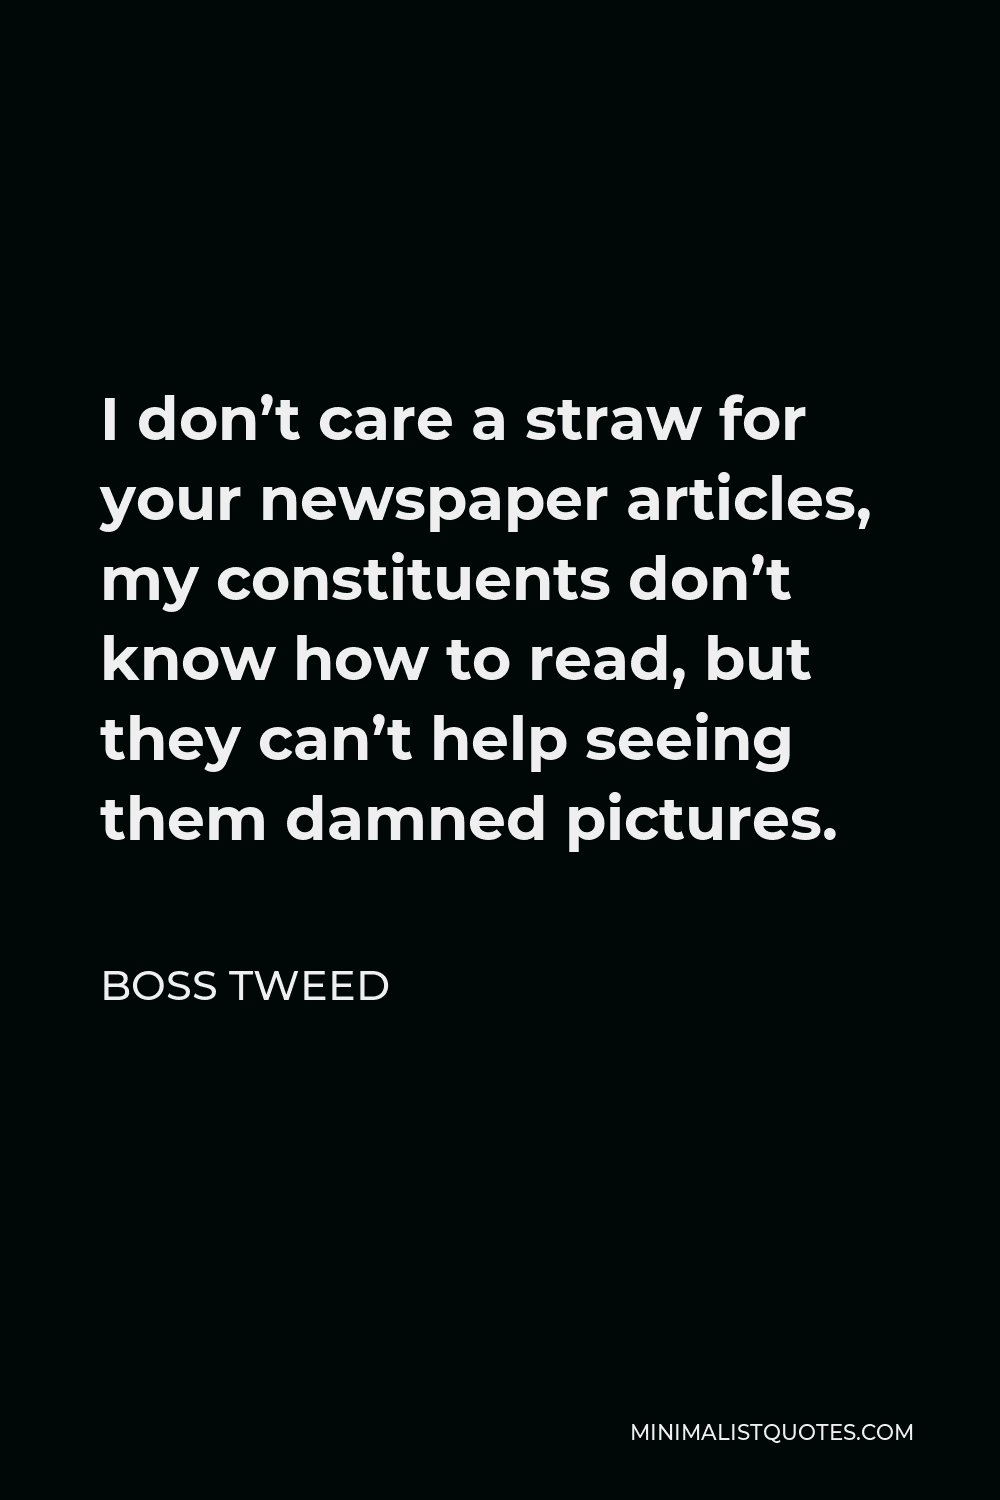 Boss Tweed Quote - I don’t care a straw for your newspaper articles, my constituents don’t know how to read, but they can’t help seeing them damned pictures.